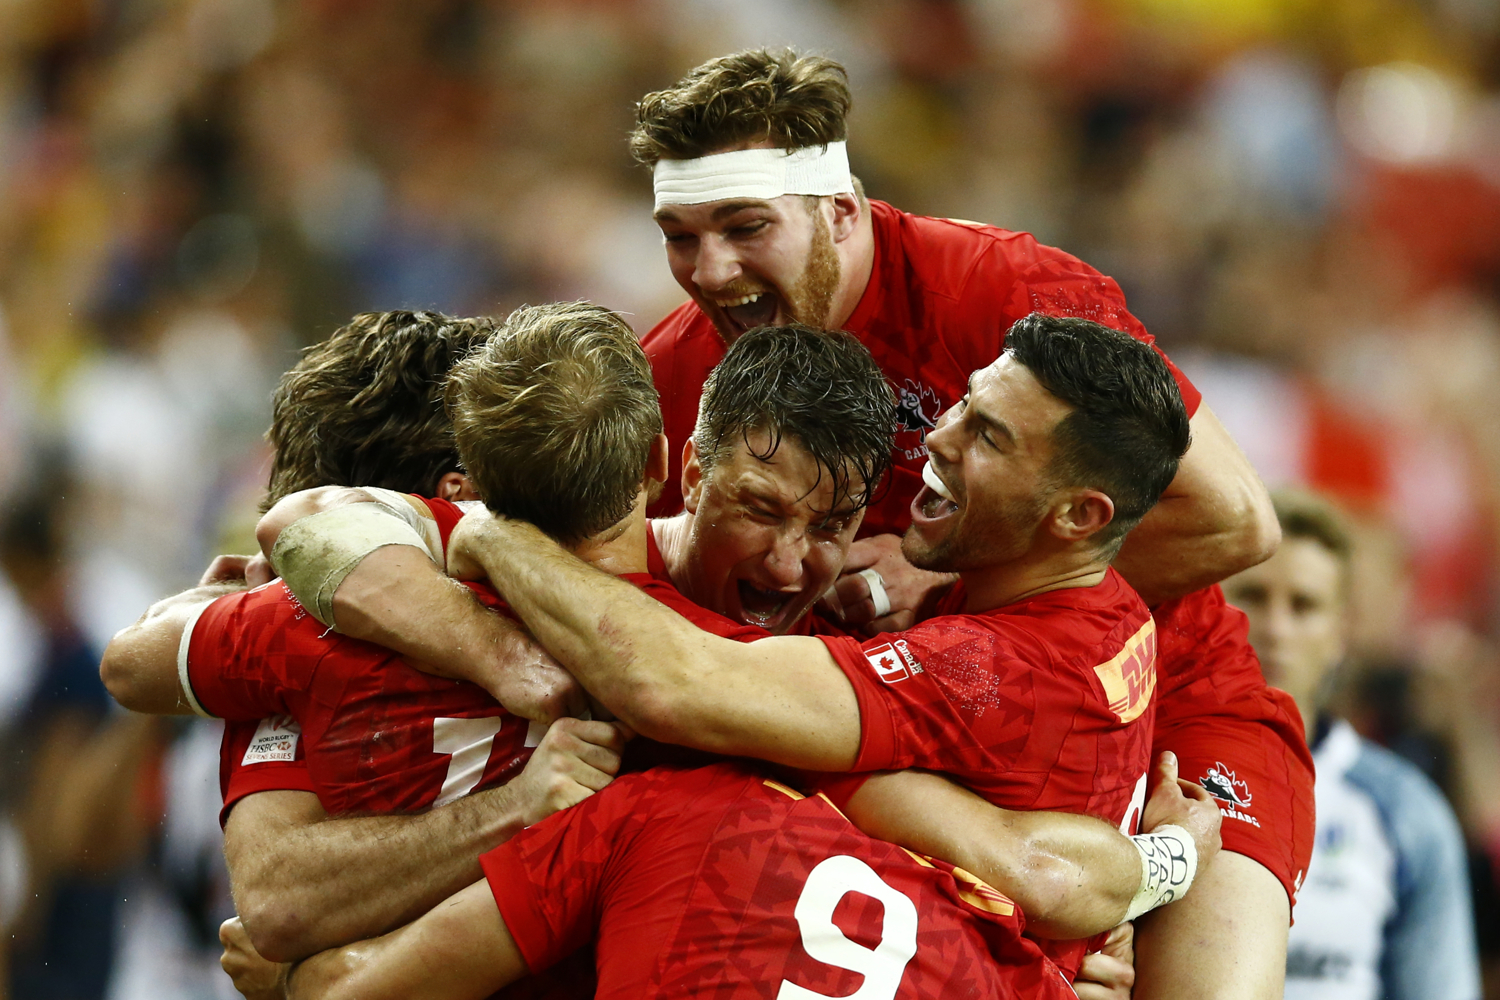  Rugby Union - Singapore Sevens Final - National Stadium, Singapore - 16/04/17 - Canada players celebrate their victory. REUTERS/Yong Teck Lim 